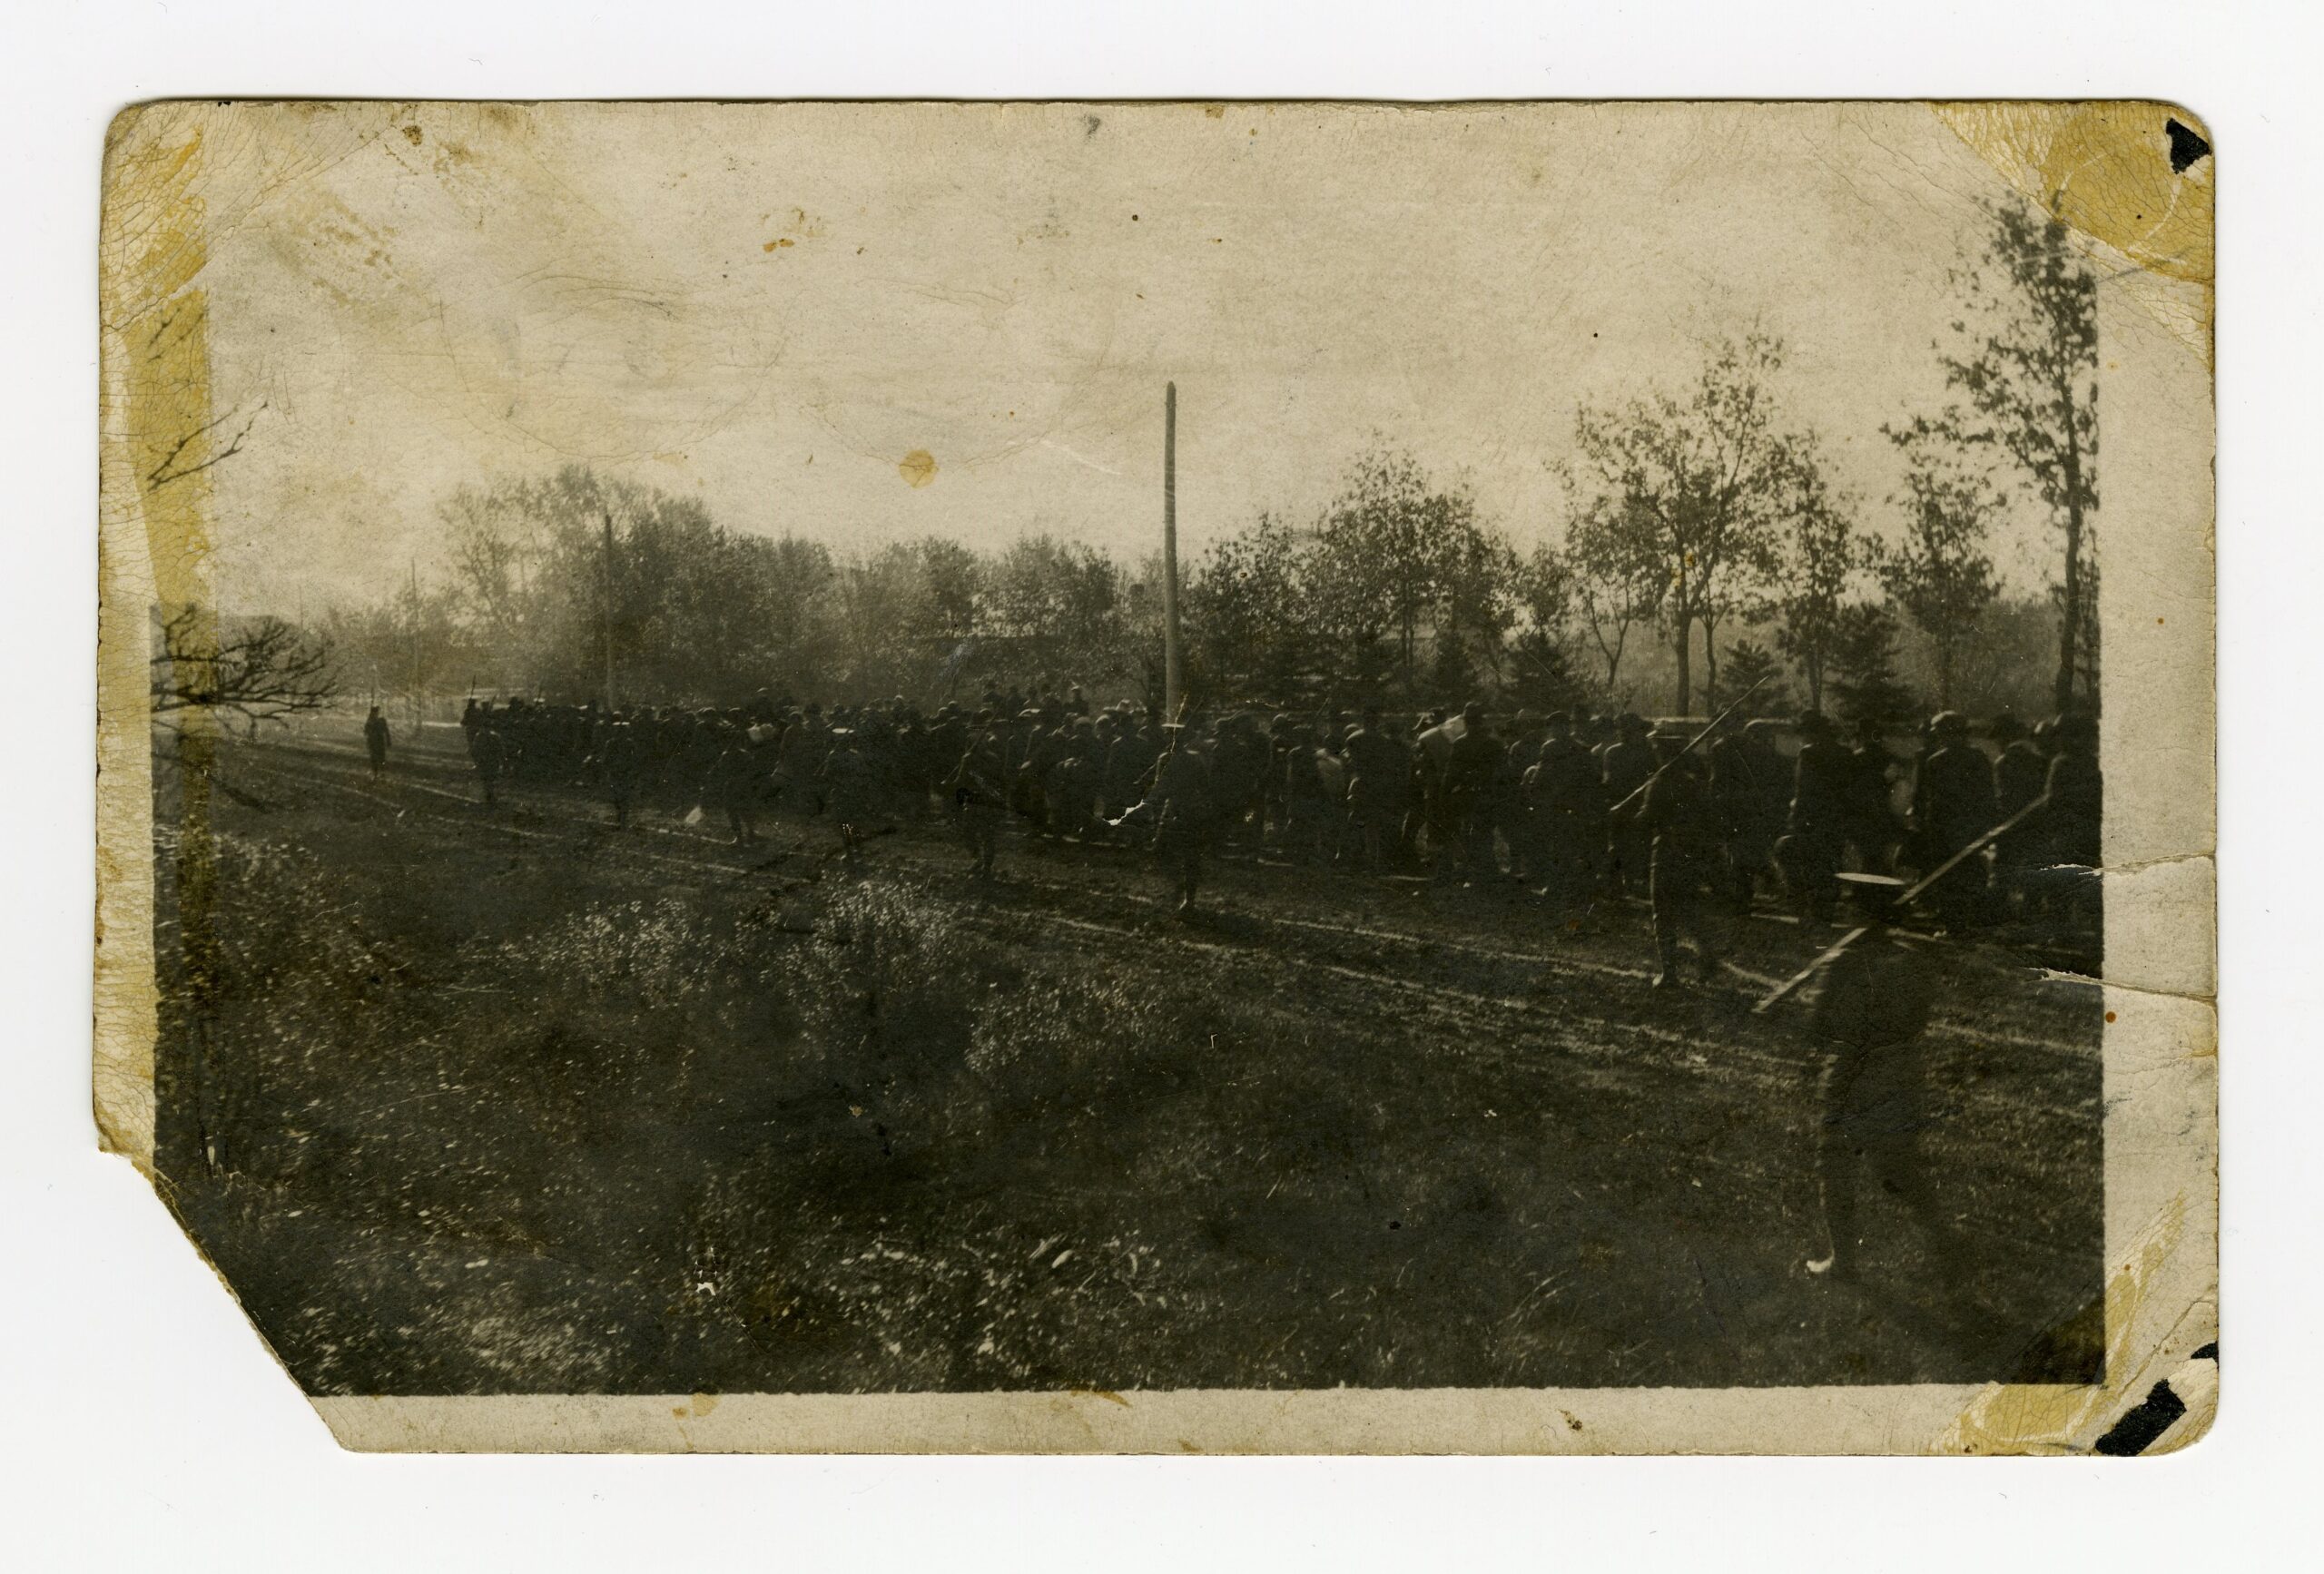 A worn sepia-toned photograph with ths bottom left corner torn off, showing a group of men marching into the distance, escorted by individuals with rifles at attention on their shoulders.